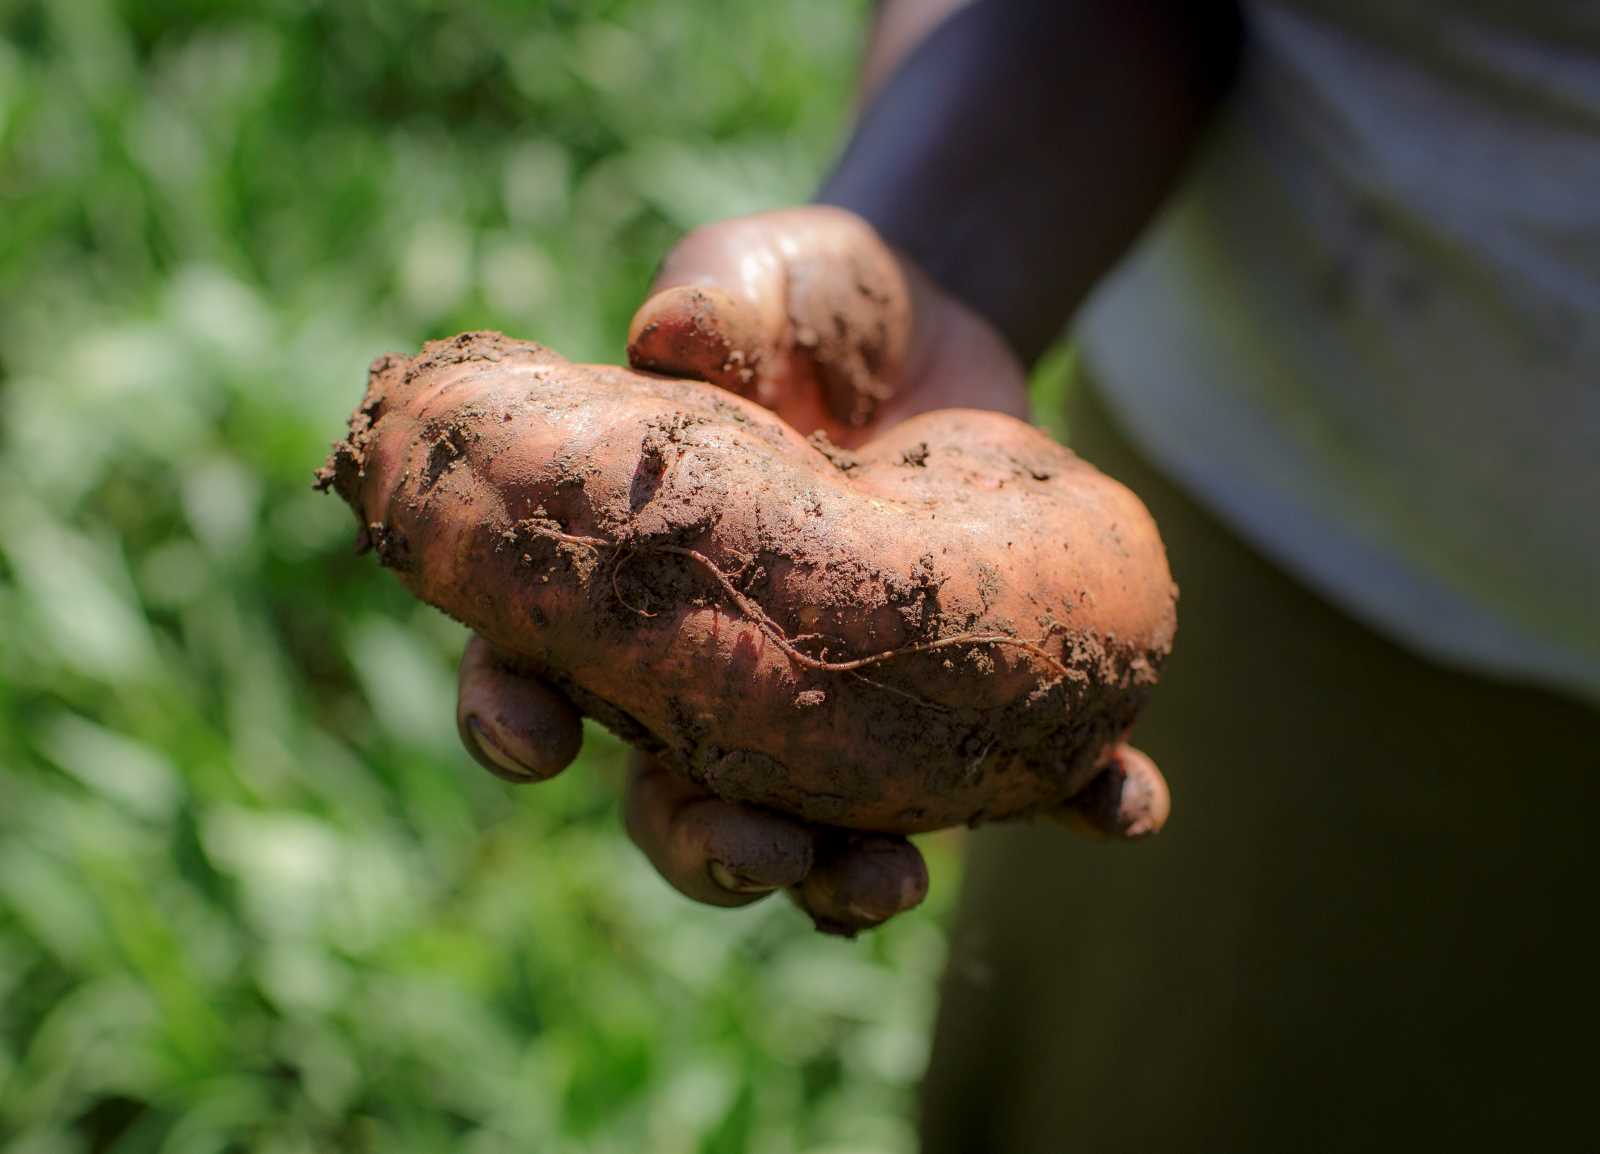 Orange-fleshed sweet potatoes are popular in East Africa.